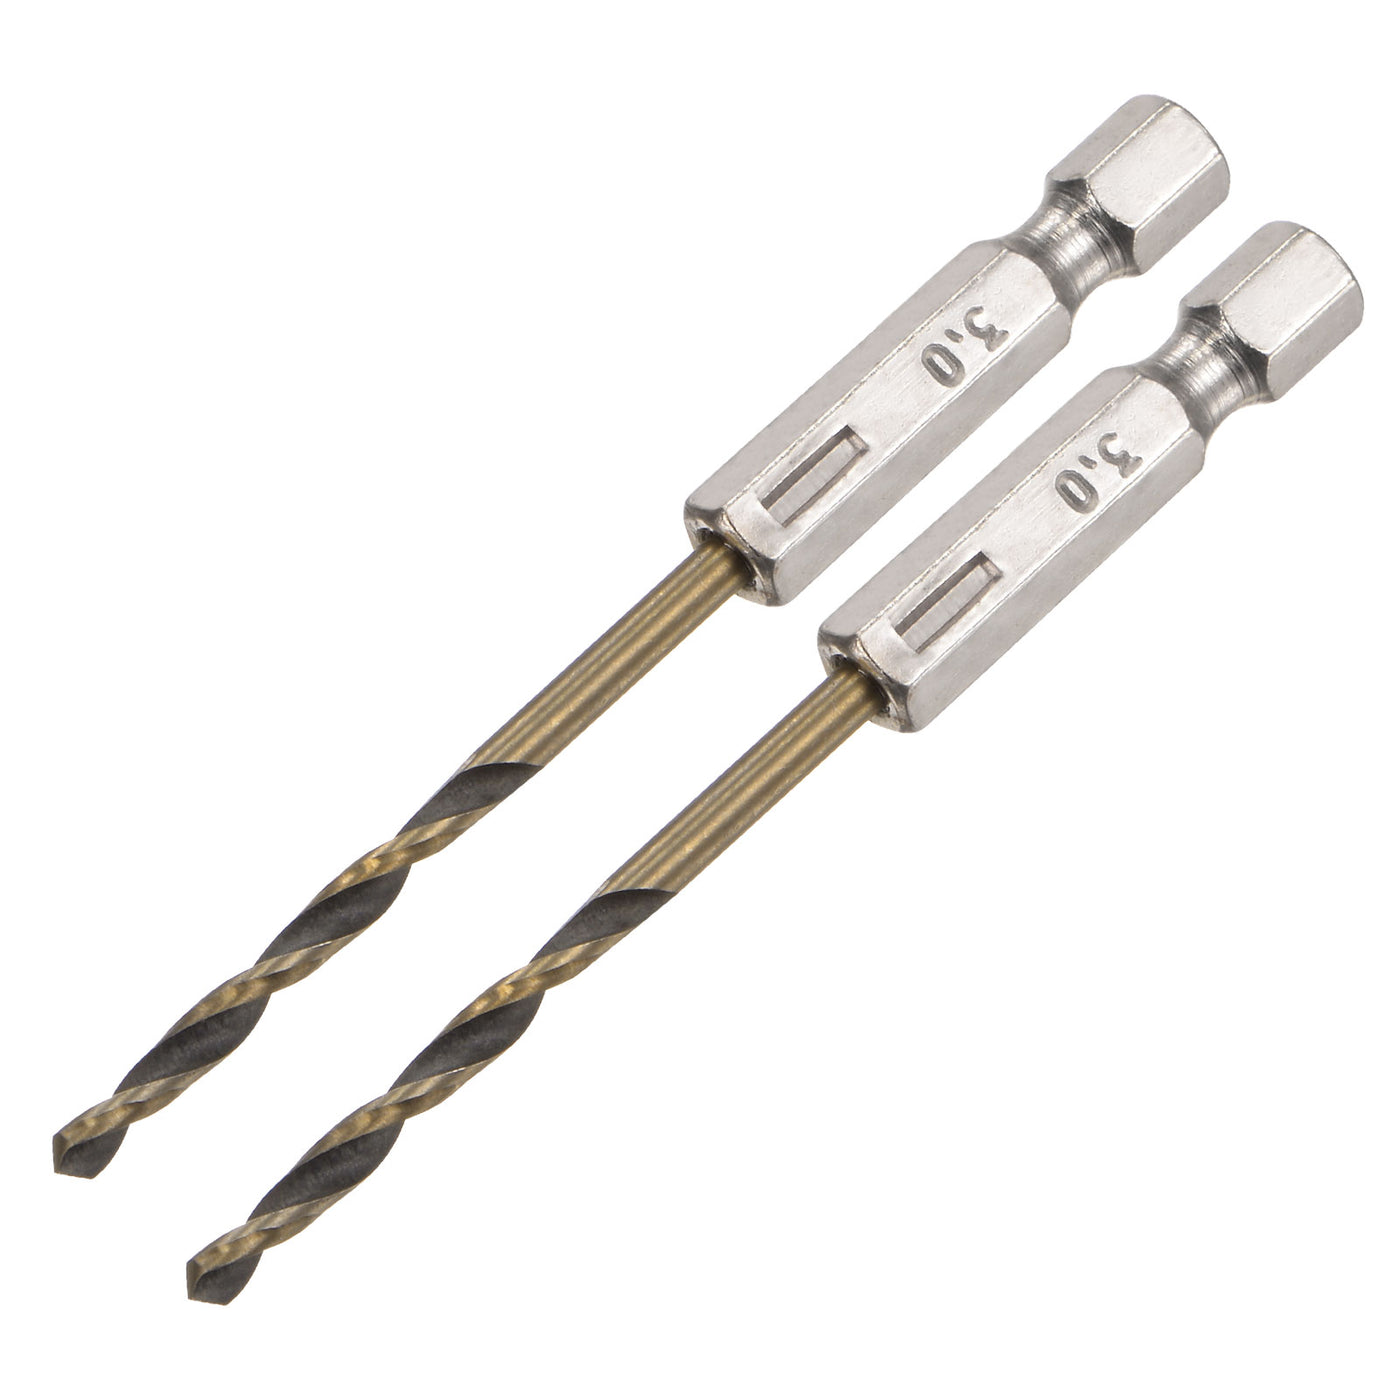 uxcell Uxcell 2Pcs 3mm High Speed Steel Twist Drill Bit with Hex Shank 80mm Length